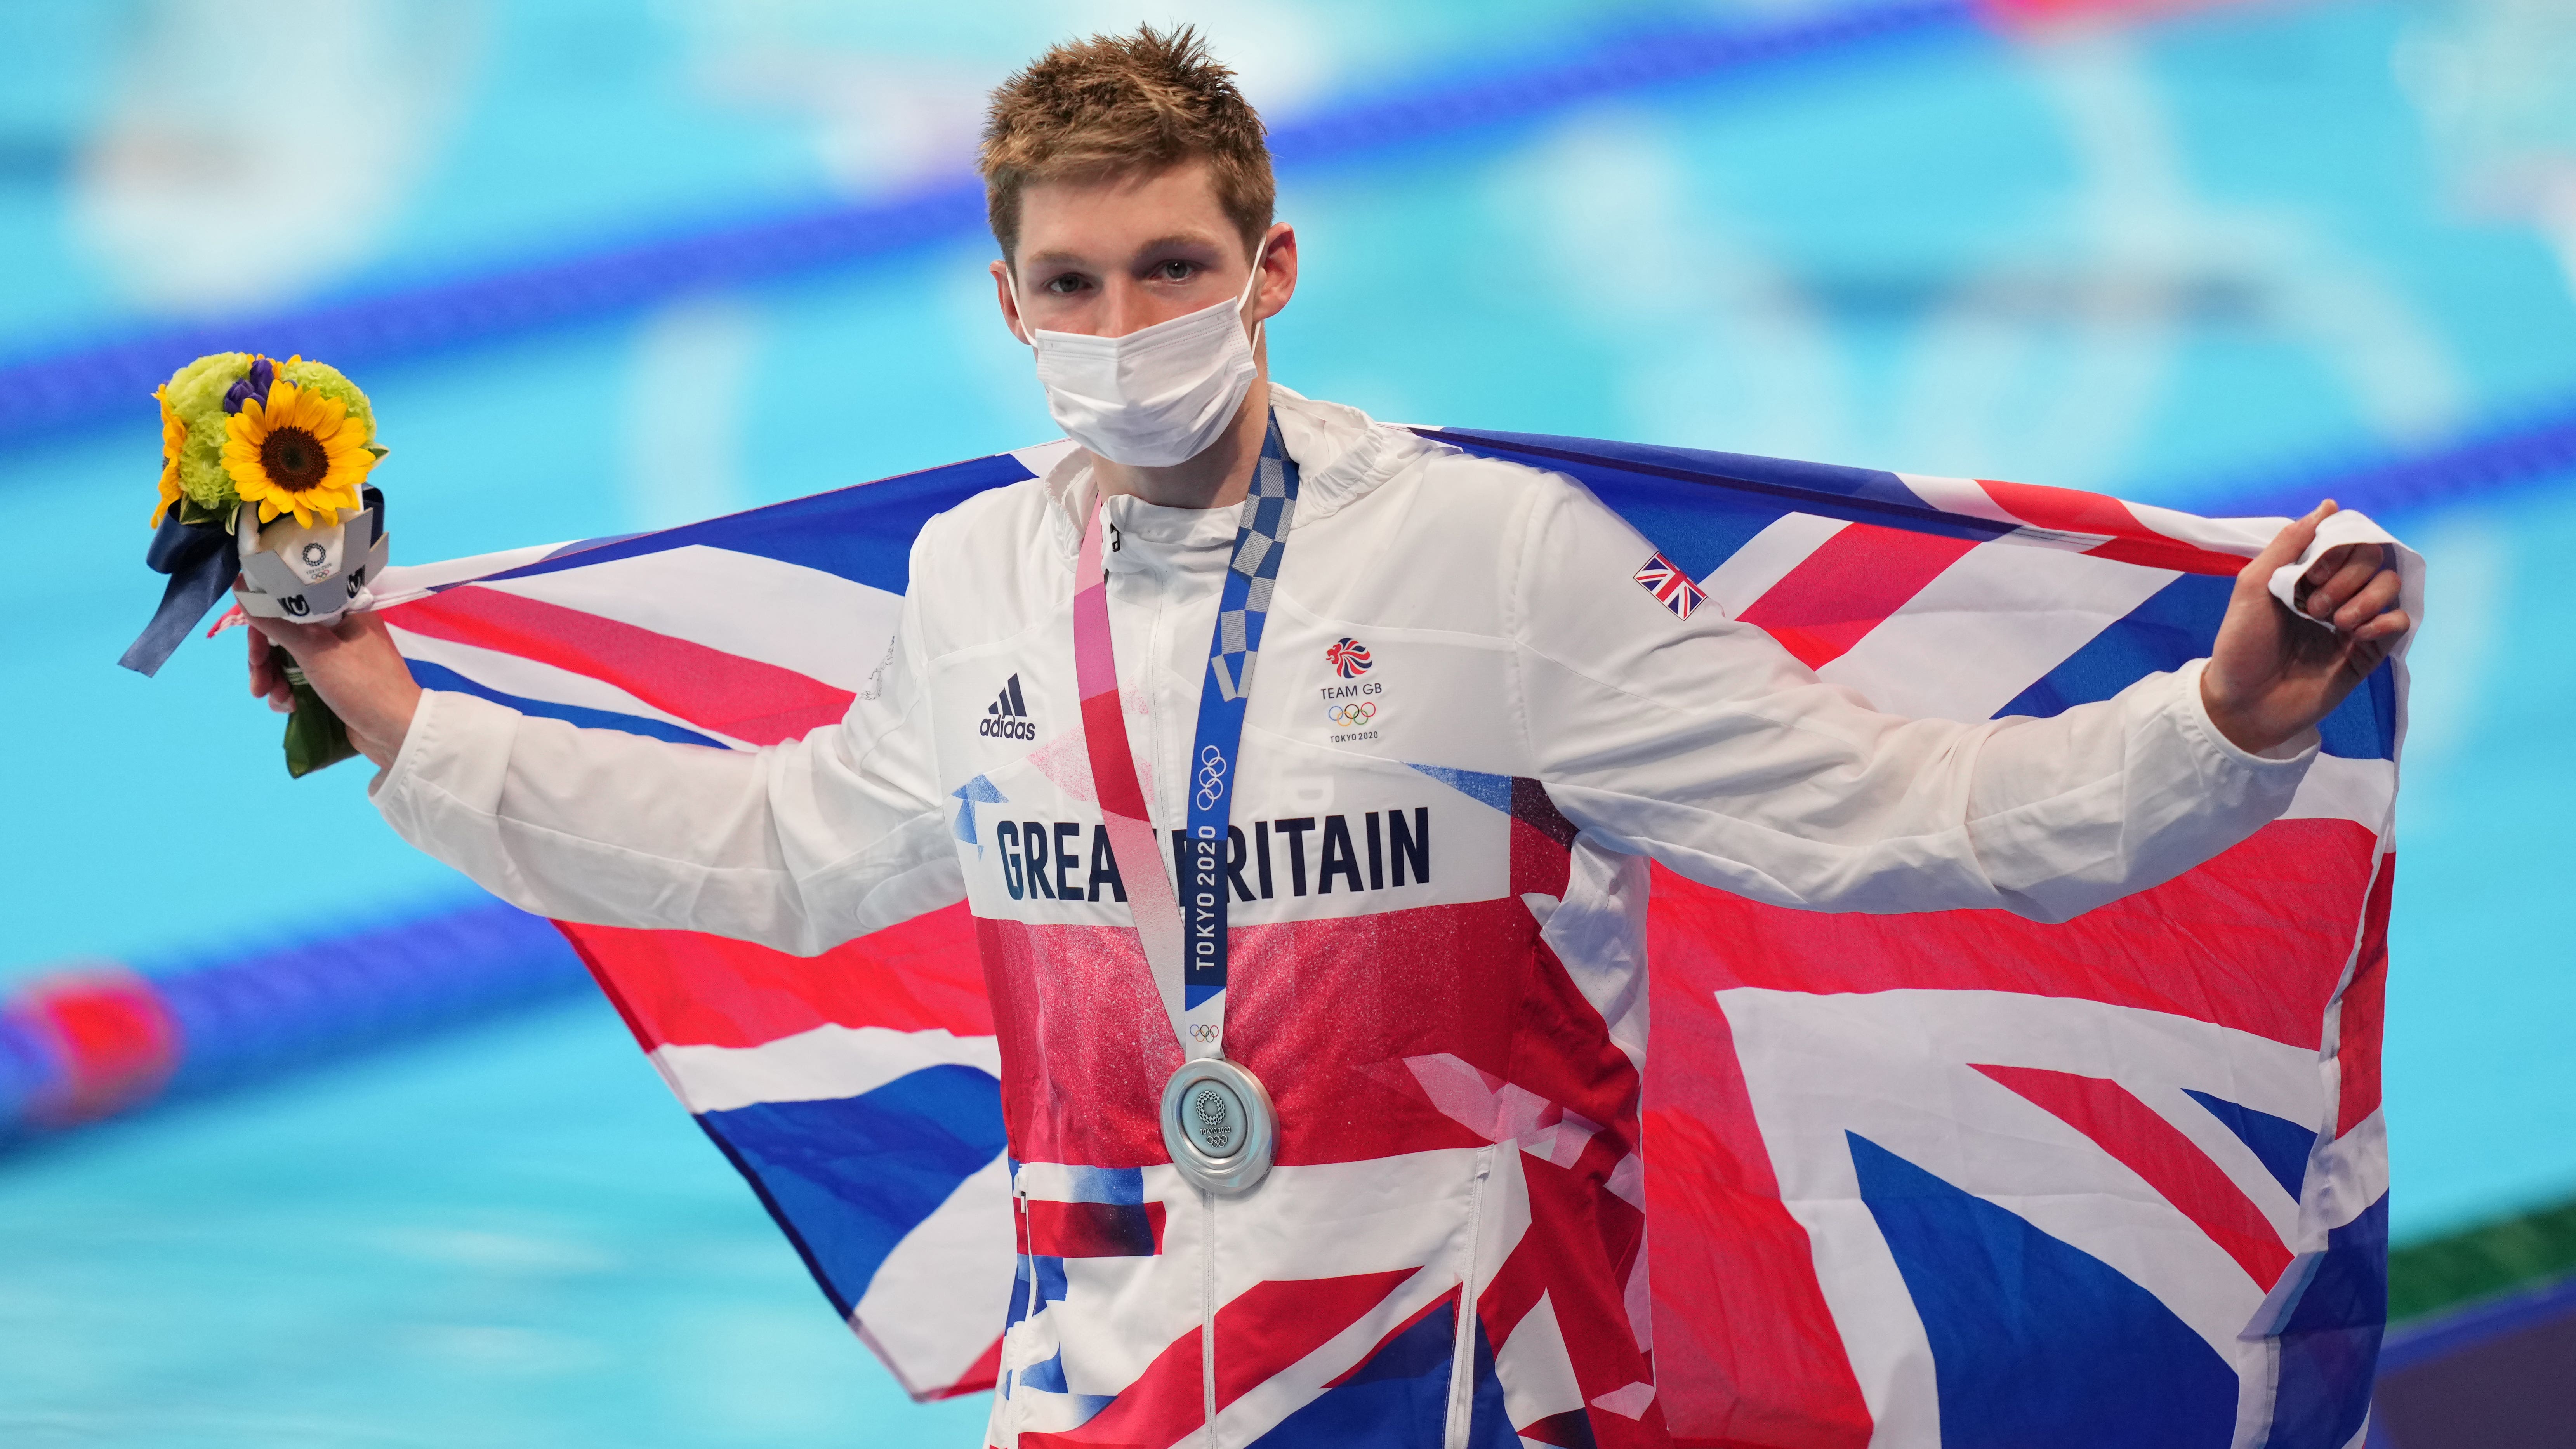 Duncan Scott Takes Record For Most Medals At An Olympics By A British